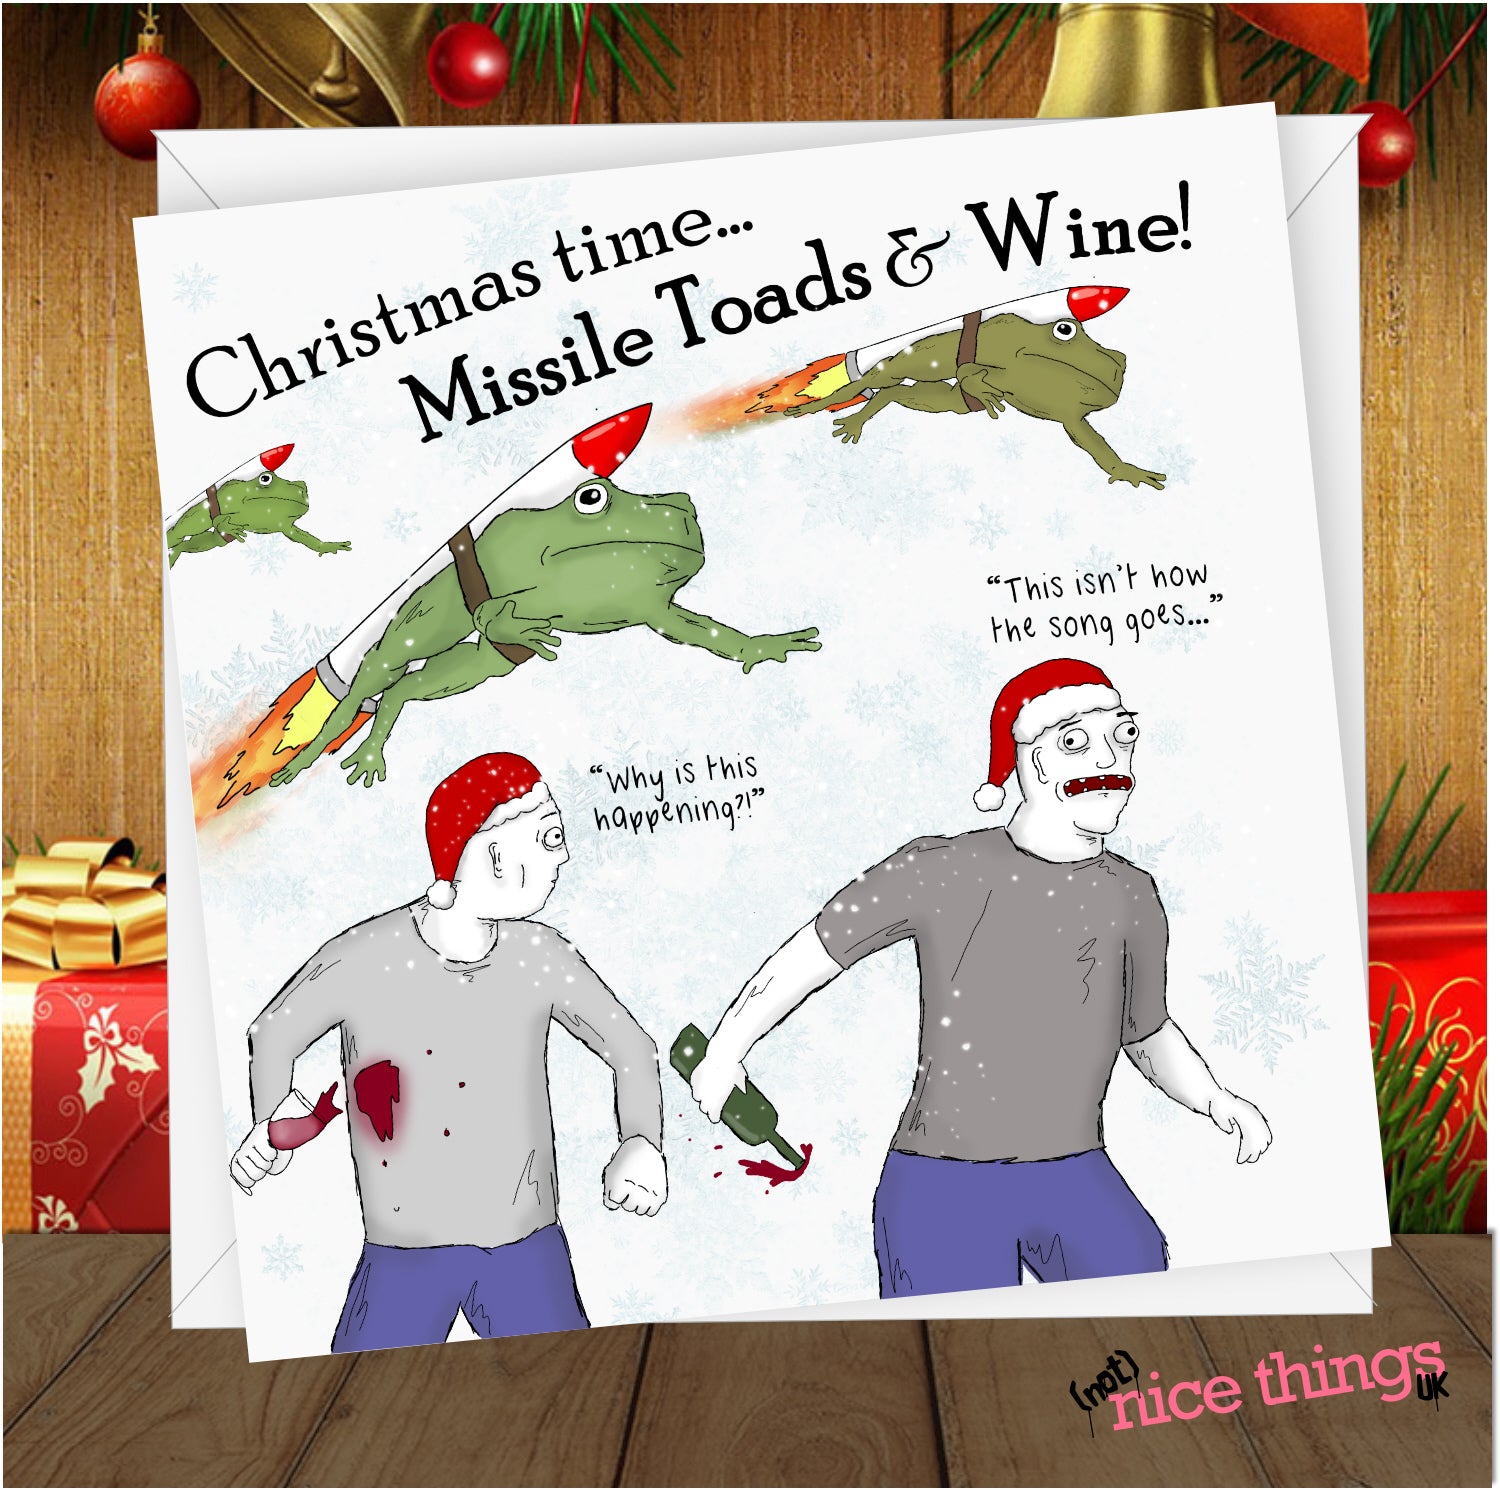 Missile Toads and Wine, Funny Christmas Card, Christmas Cards for Dad, For Him, For Her, Brother, best Friend, Weird Card, Rude Cards